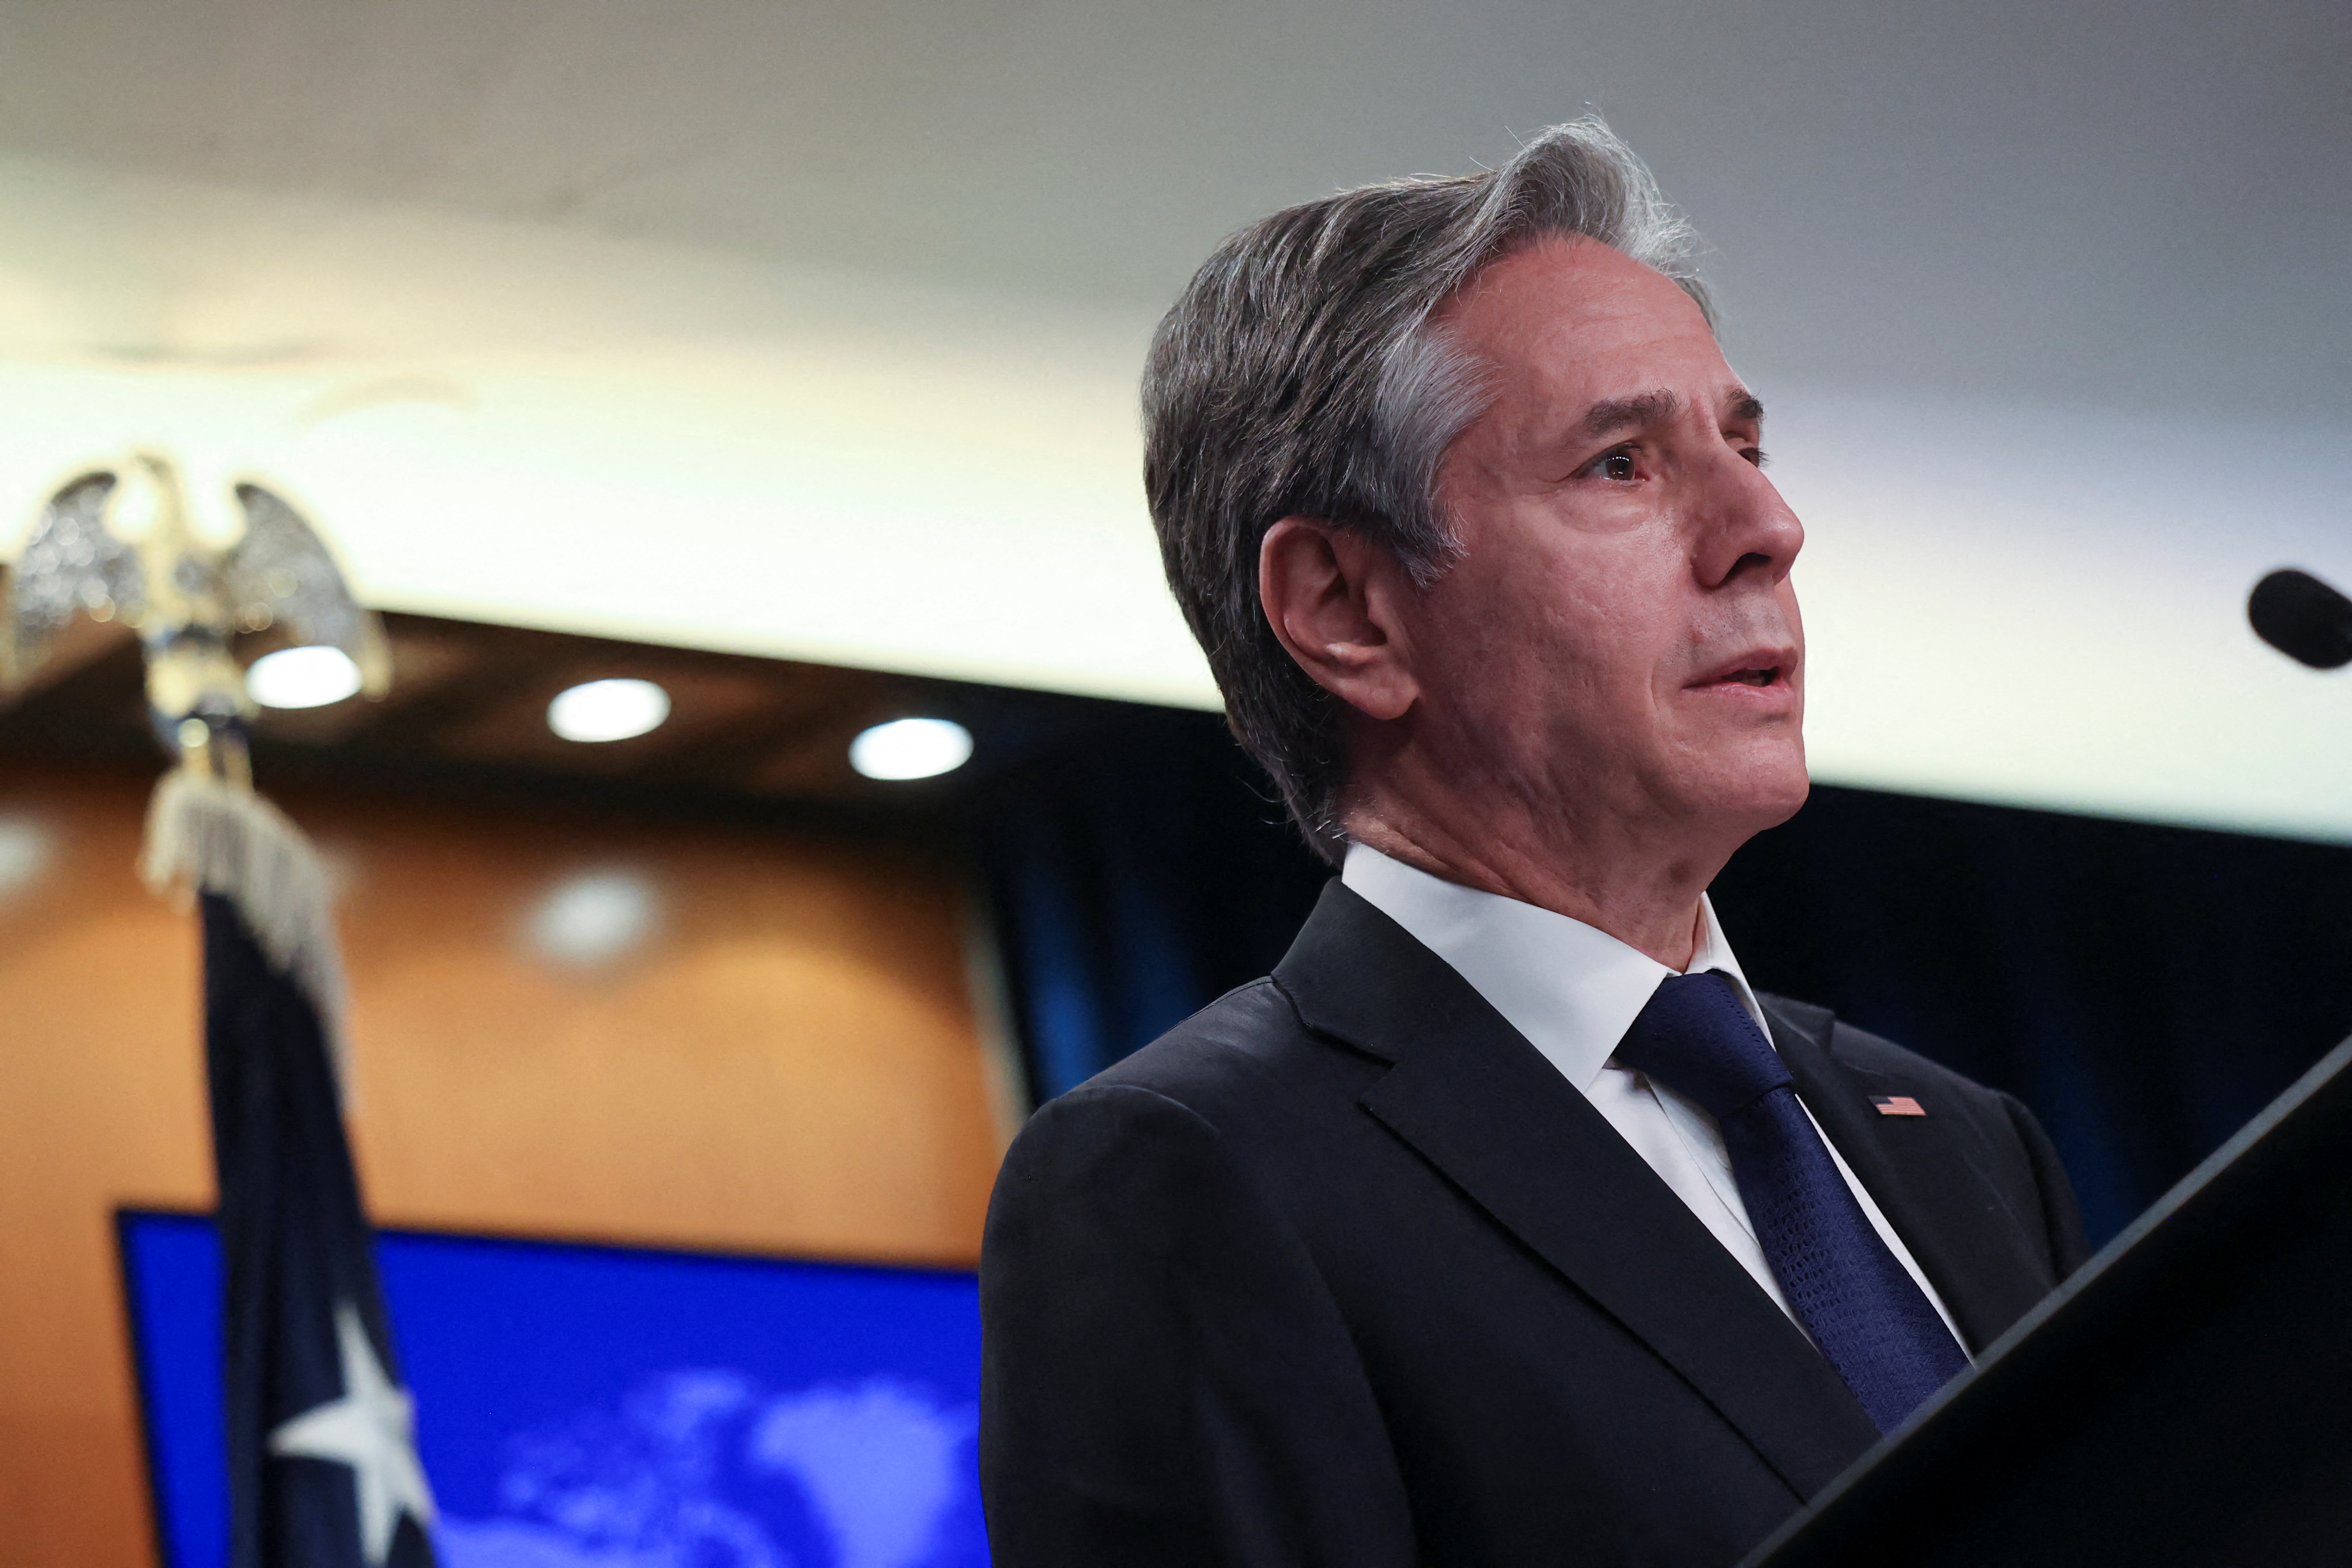 U.S. Secretary of State Antony Blinken holds a year-end news conference with news media gathered at the State Department in Washington